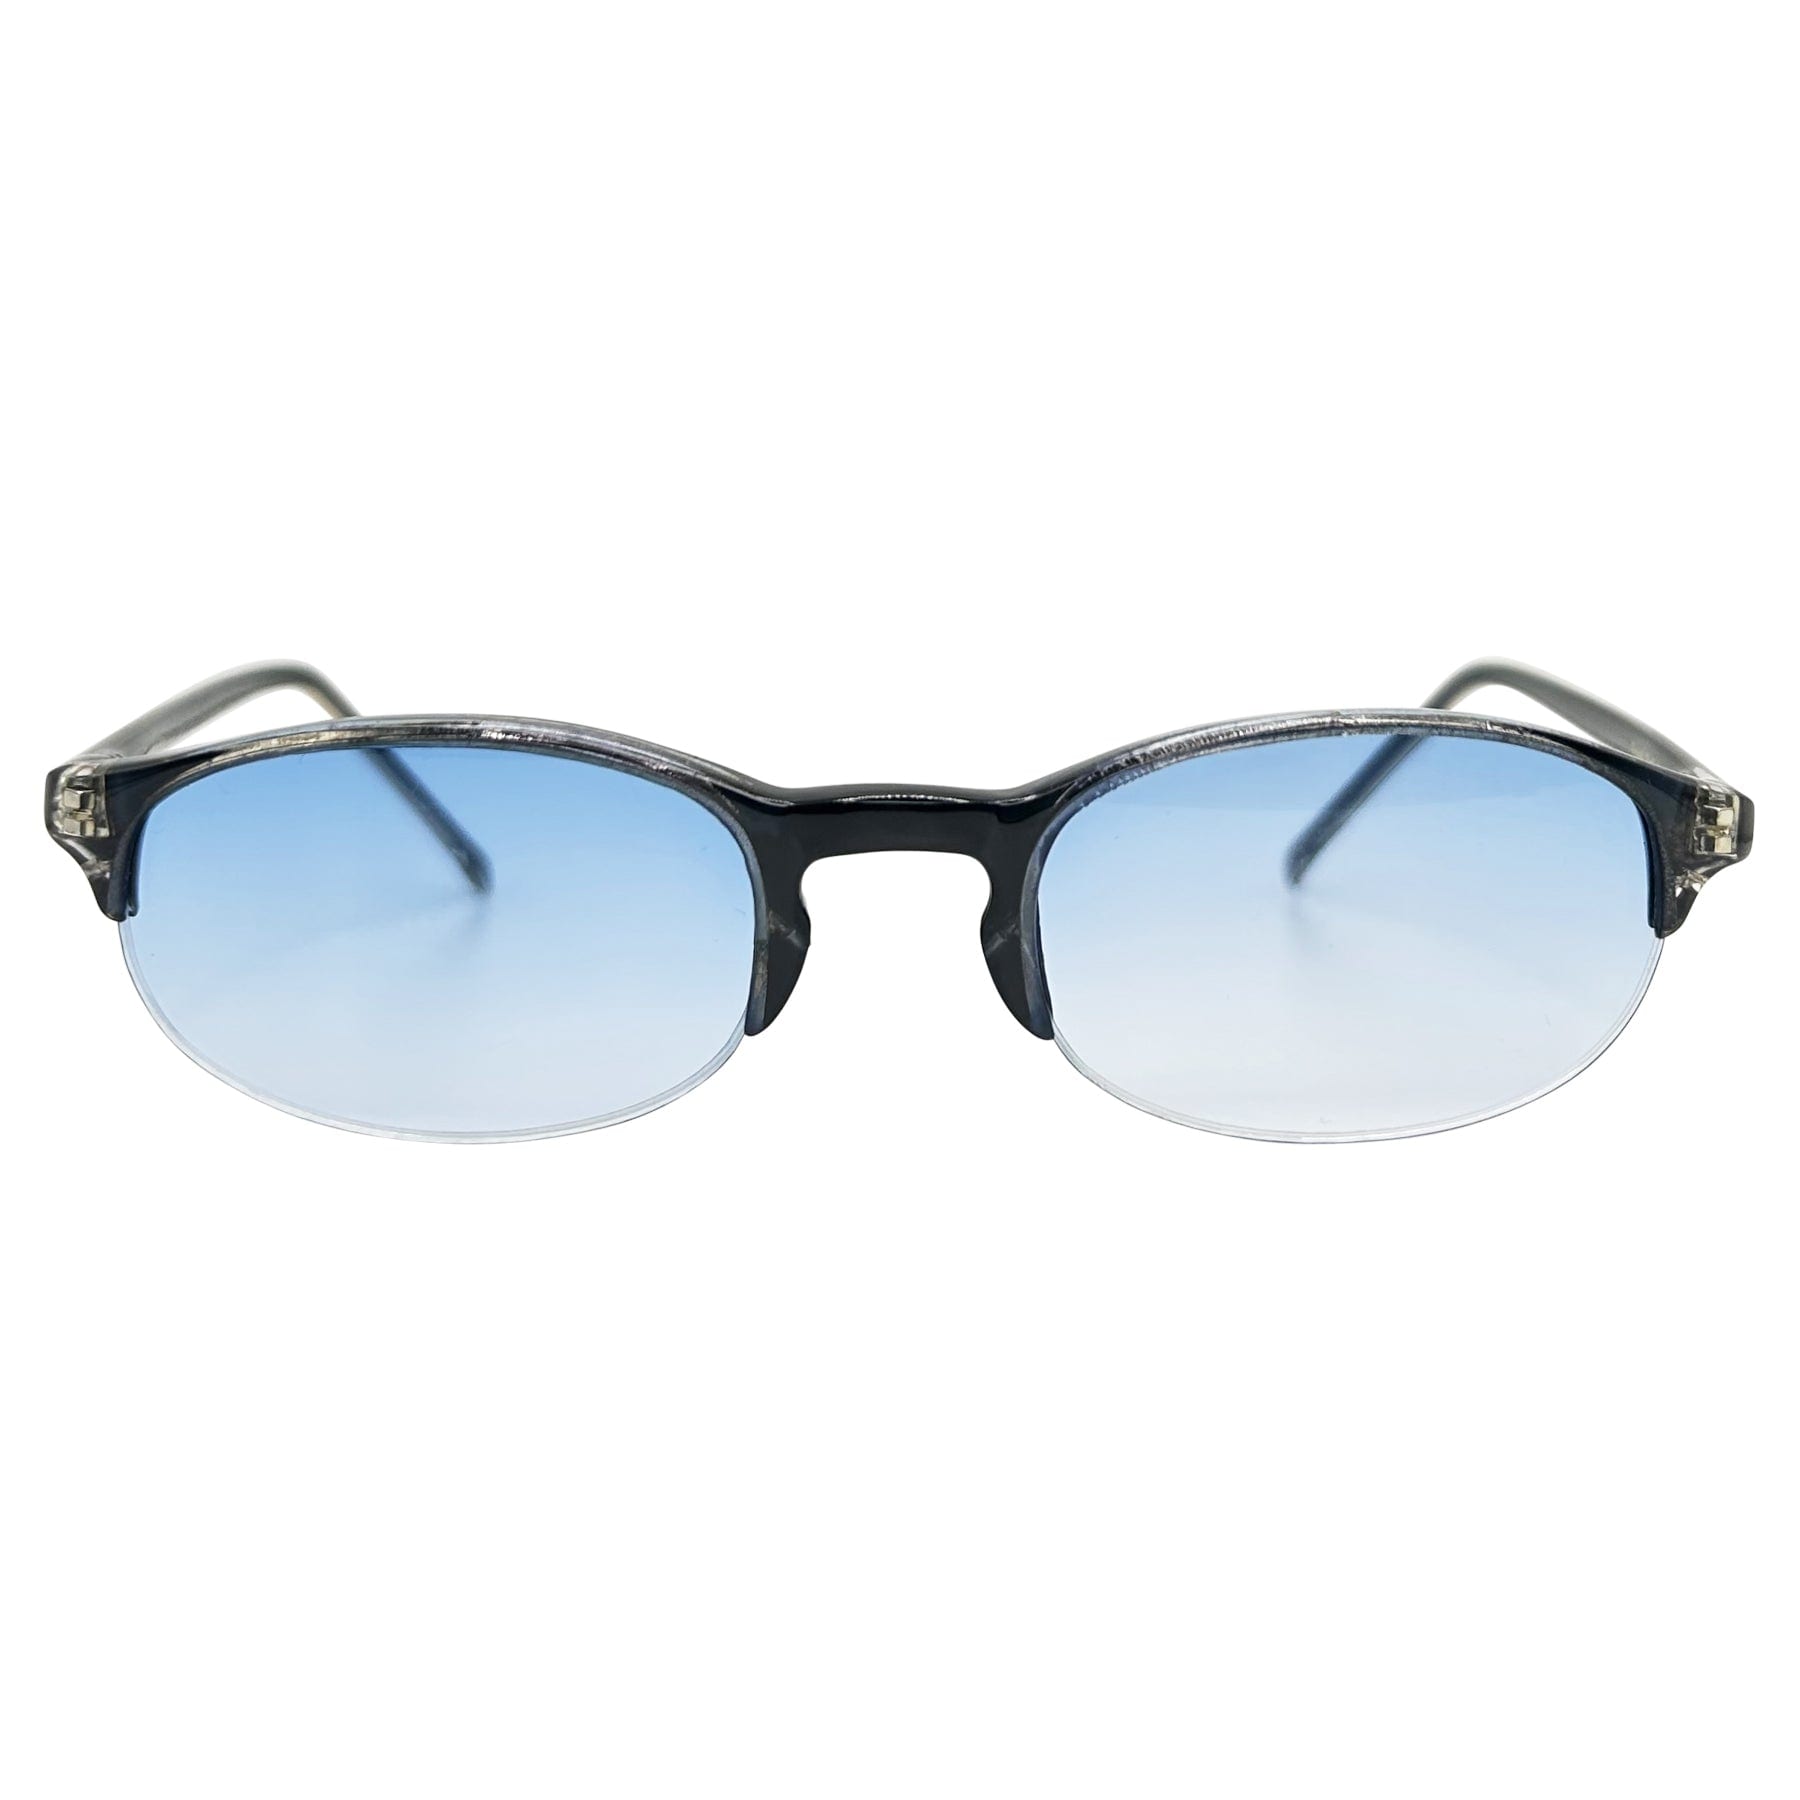 blue lens colored sunglasses with a 90s style frame